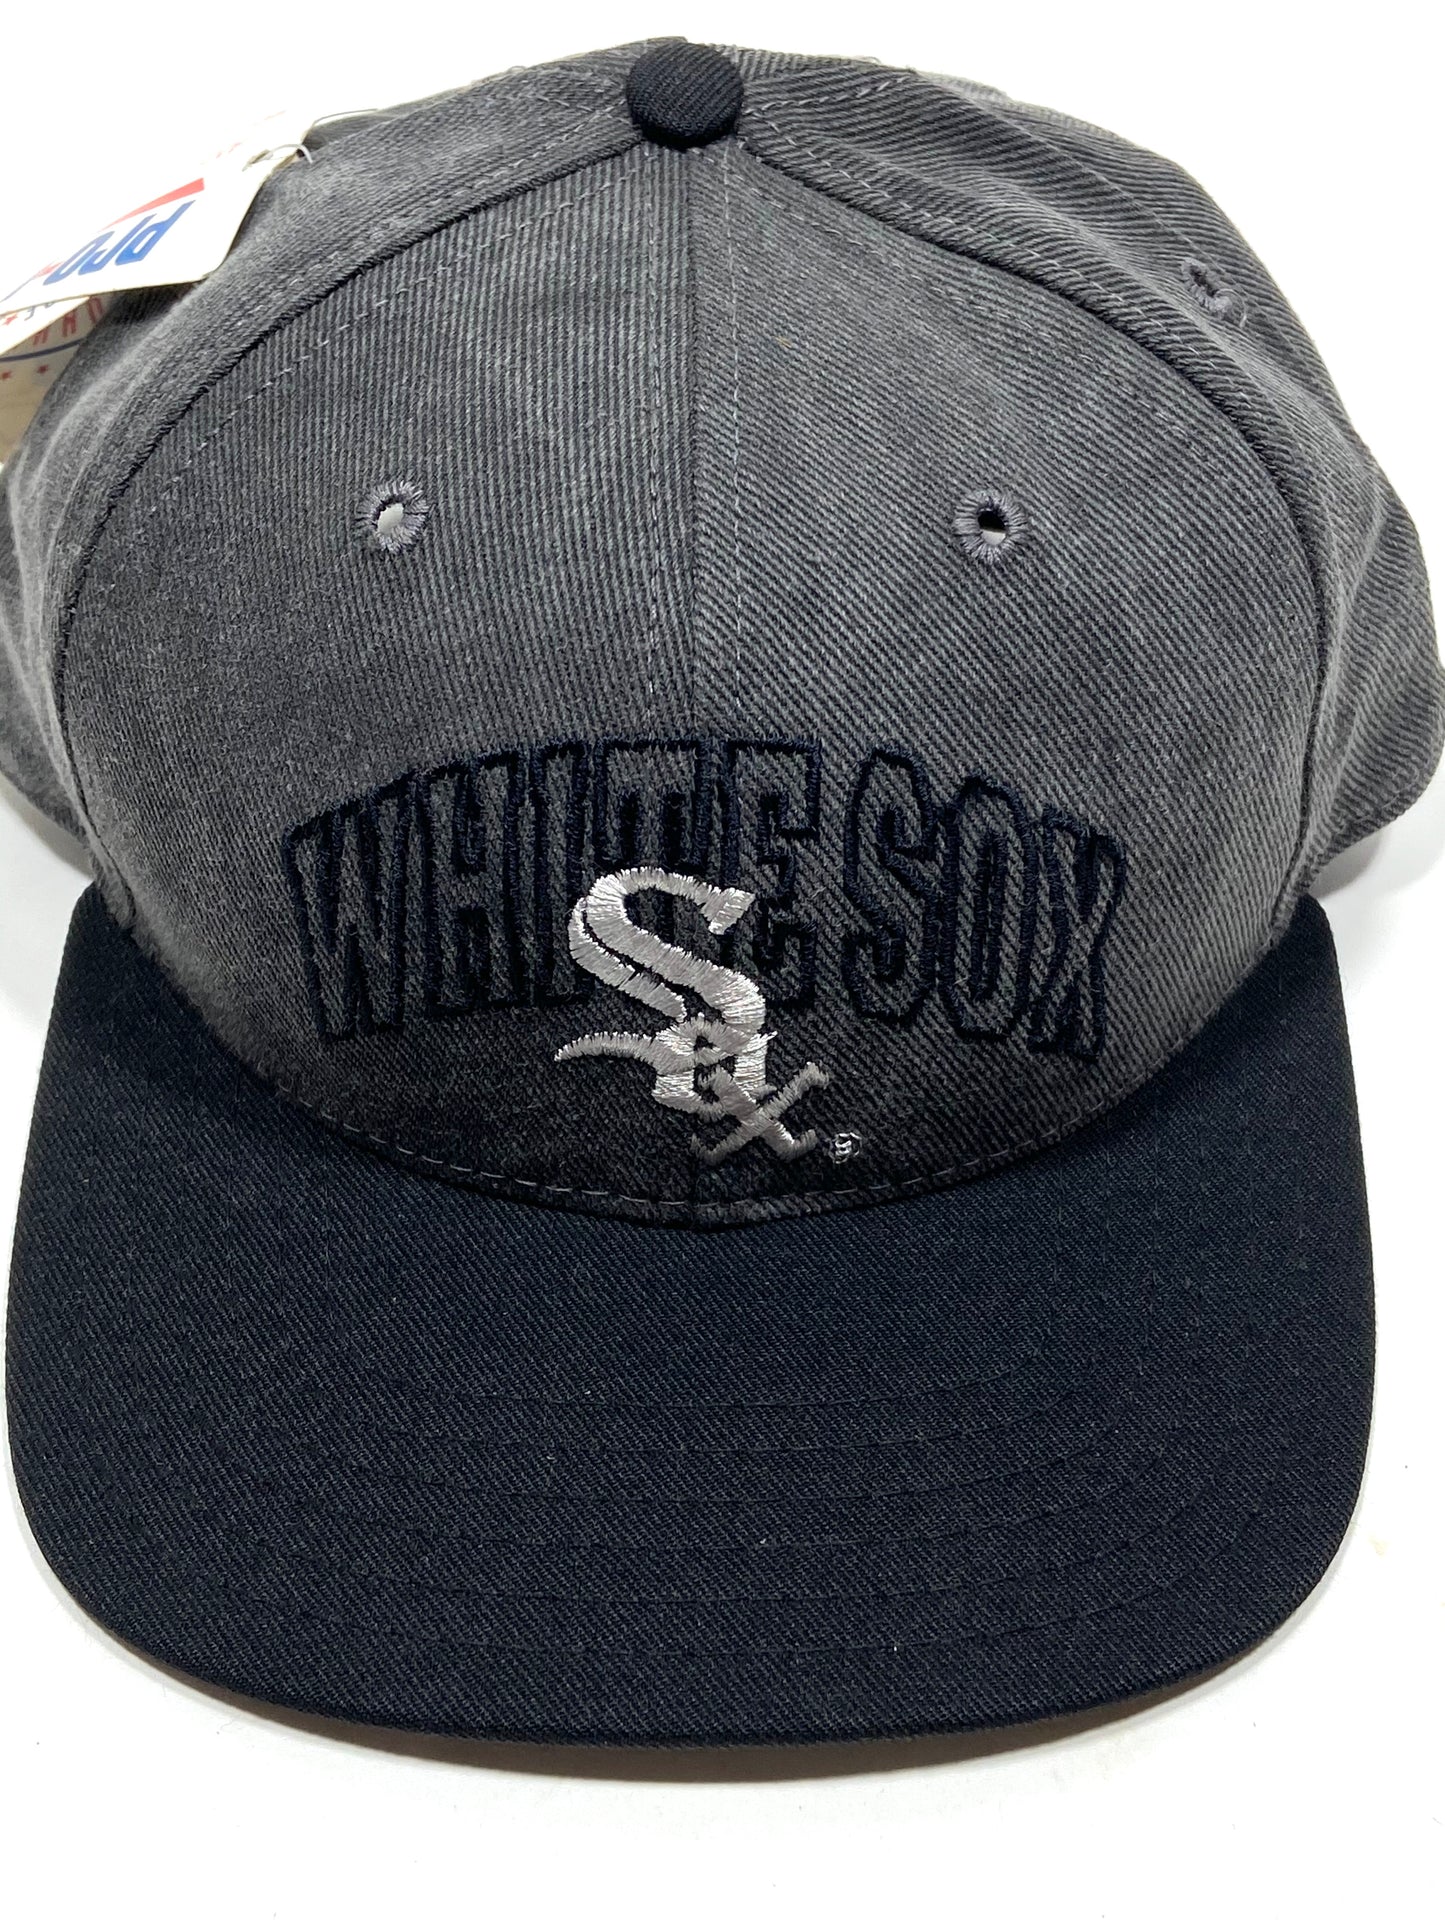 Chicago White Sox Vintage MLB Gray "Sox" Snapback by Pro-Line (Annco)